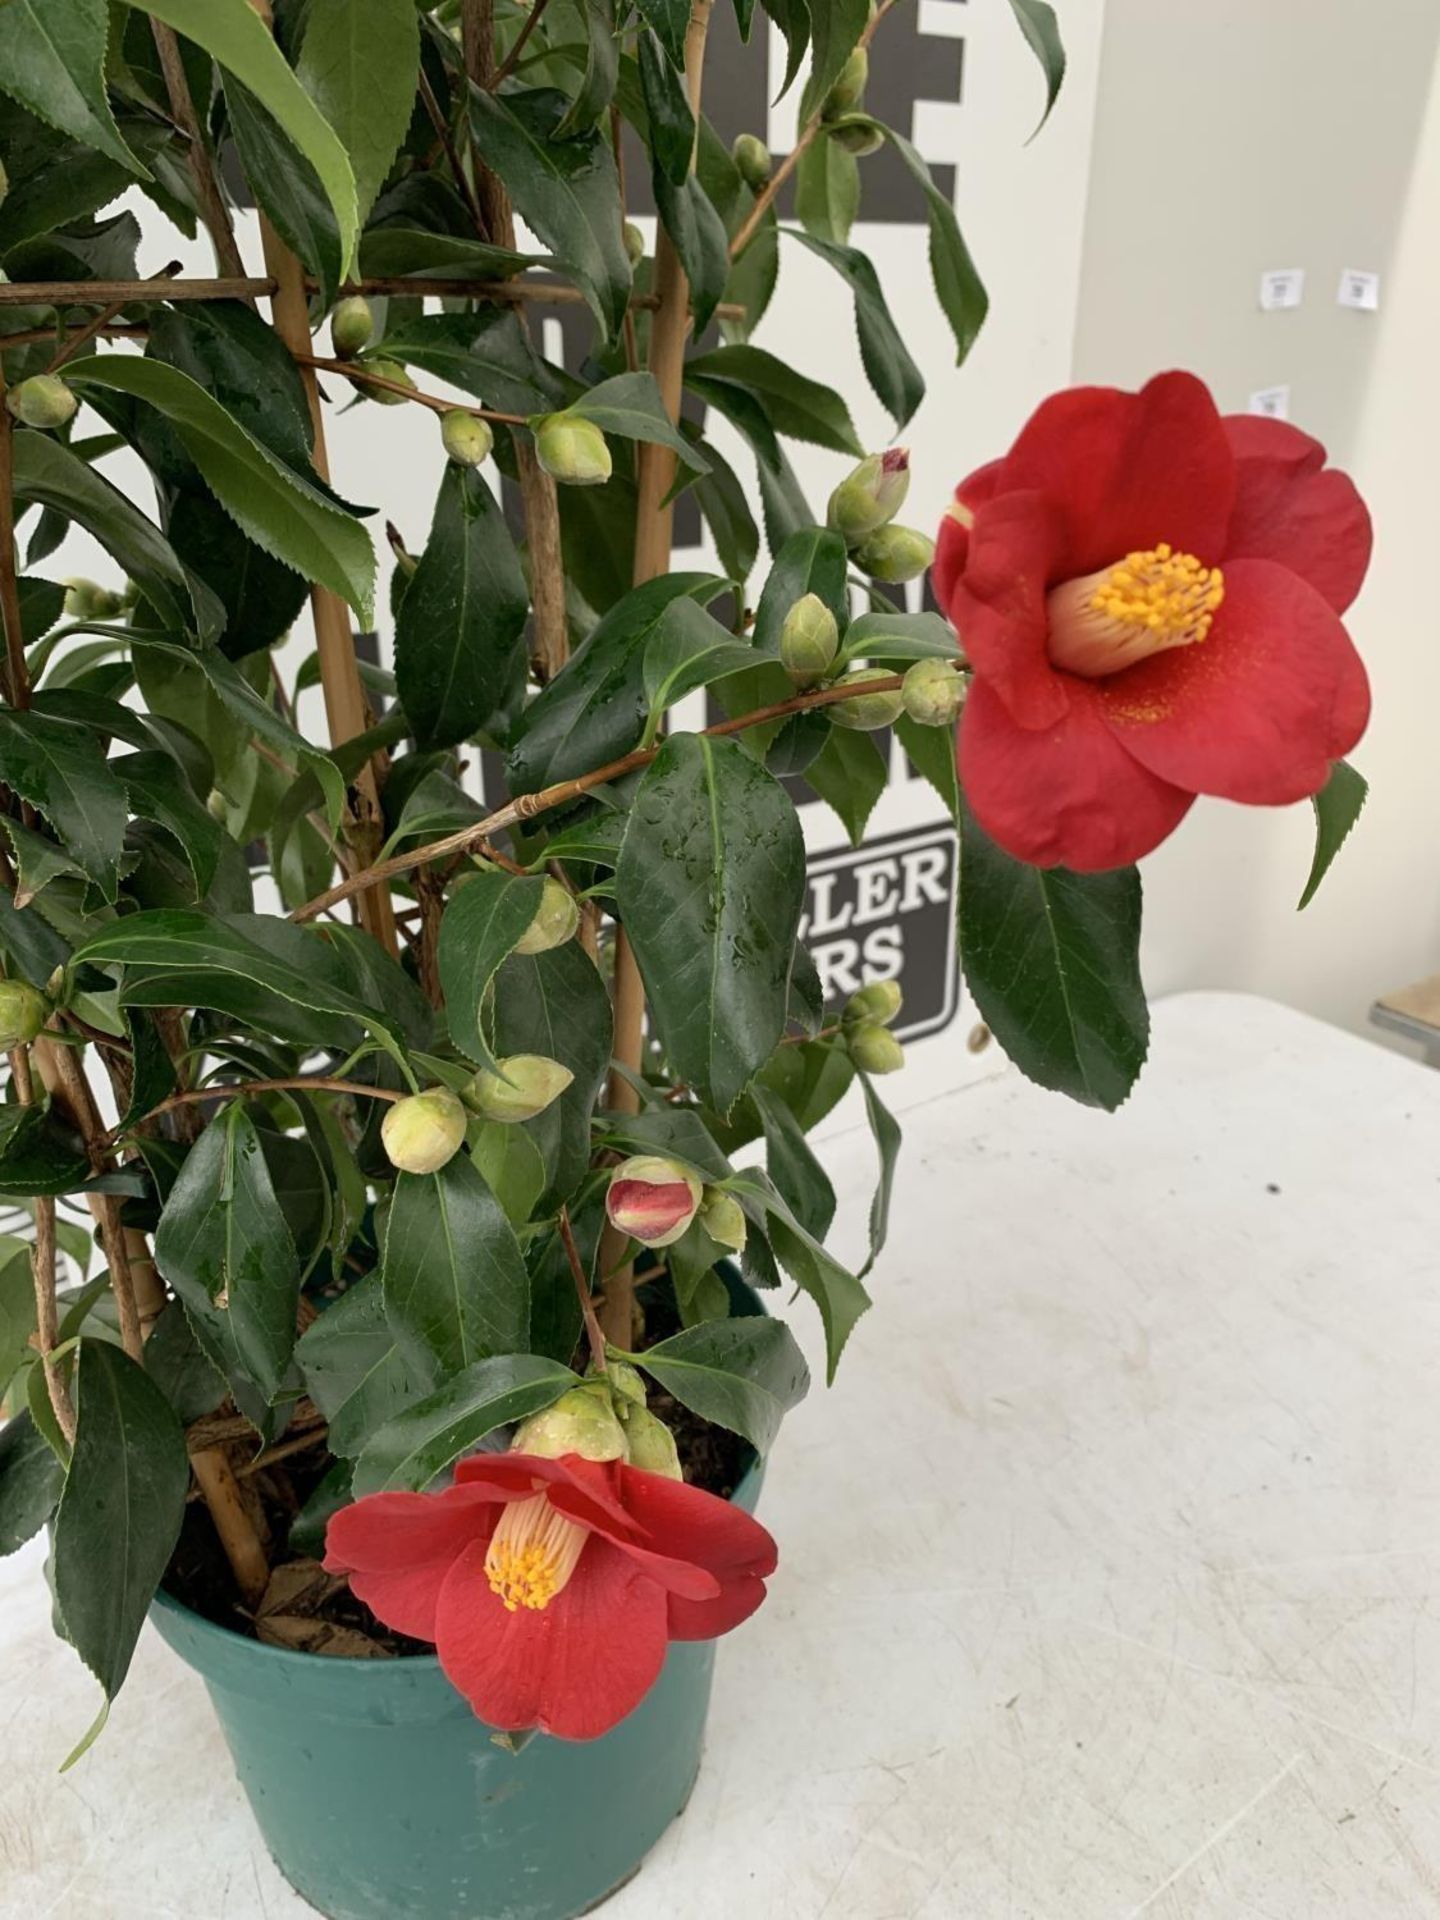 WELCOME TO ASHLEY WALLER HORTICULTURE AUCTION - LOTS ARE BEING ADDED DAILY - THE IMAGES SHOW LOTS - Image 13 of 19